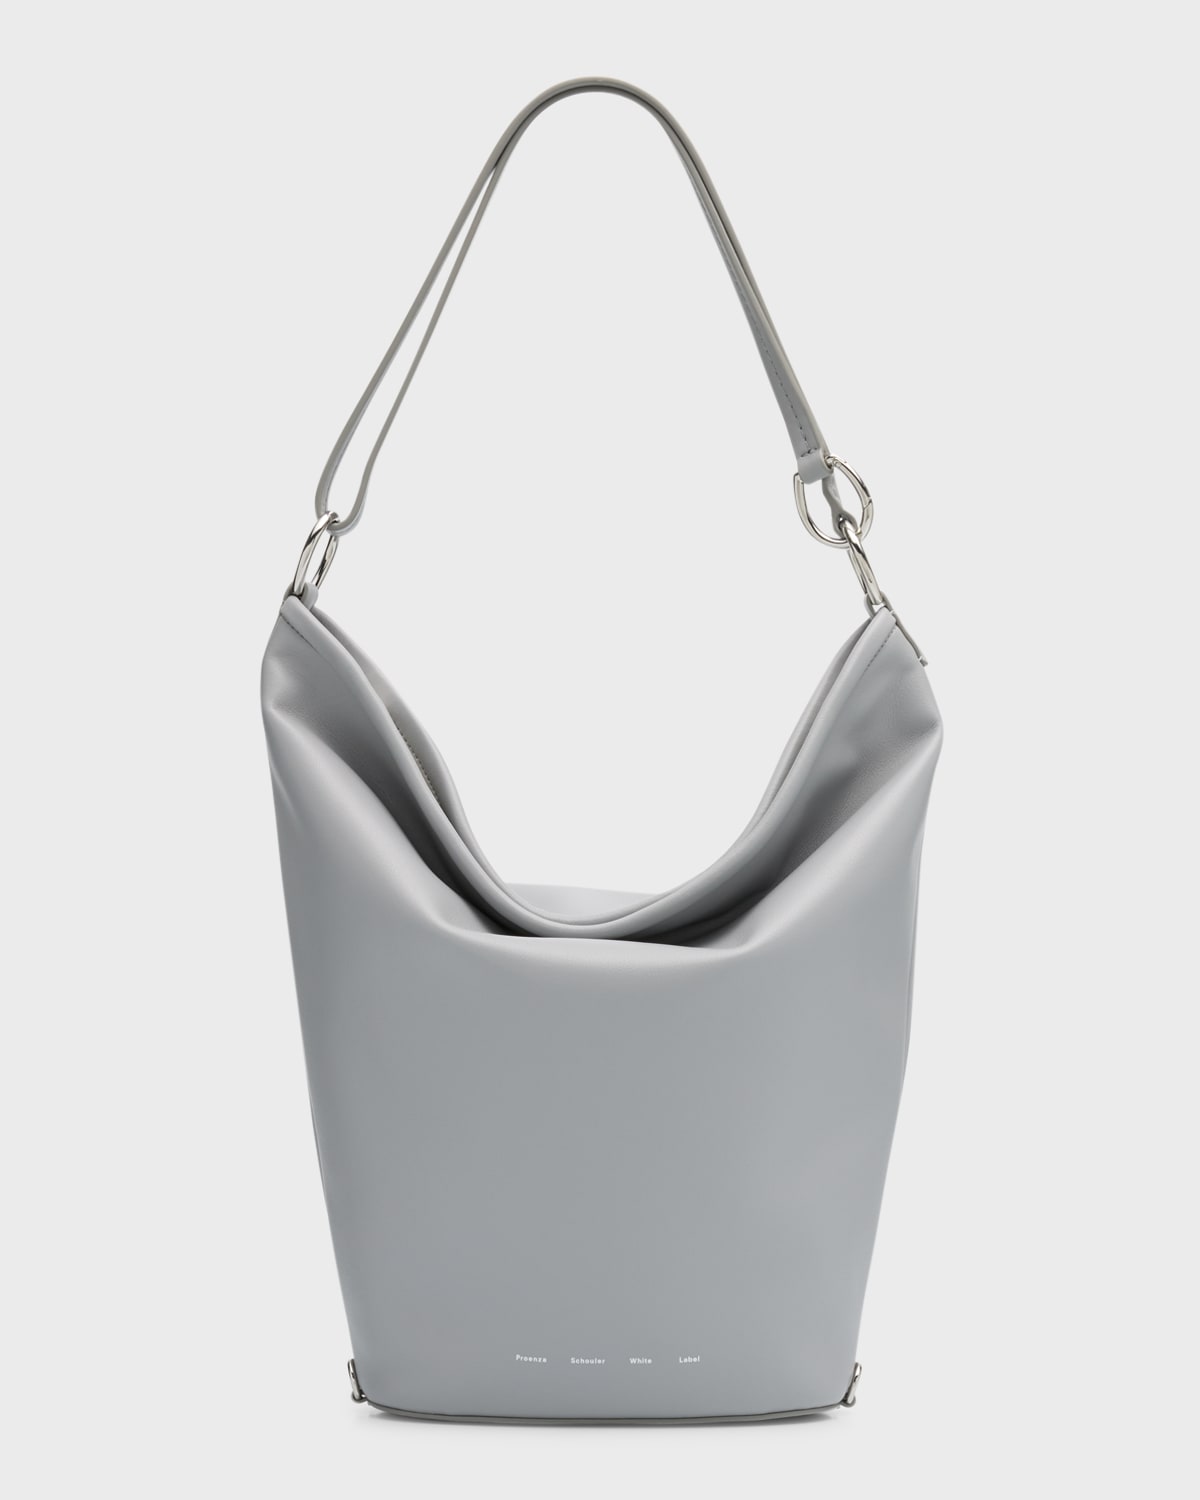 PROENZA SCHOULER WHITE LABEL SPRING LEATHER BUCKET BAG